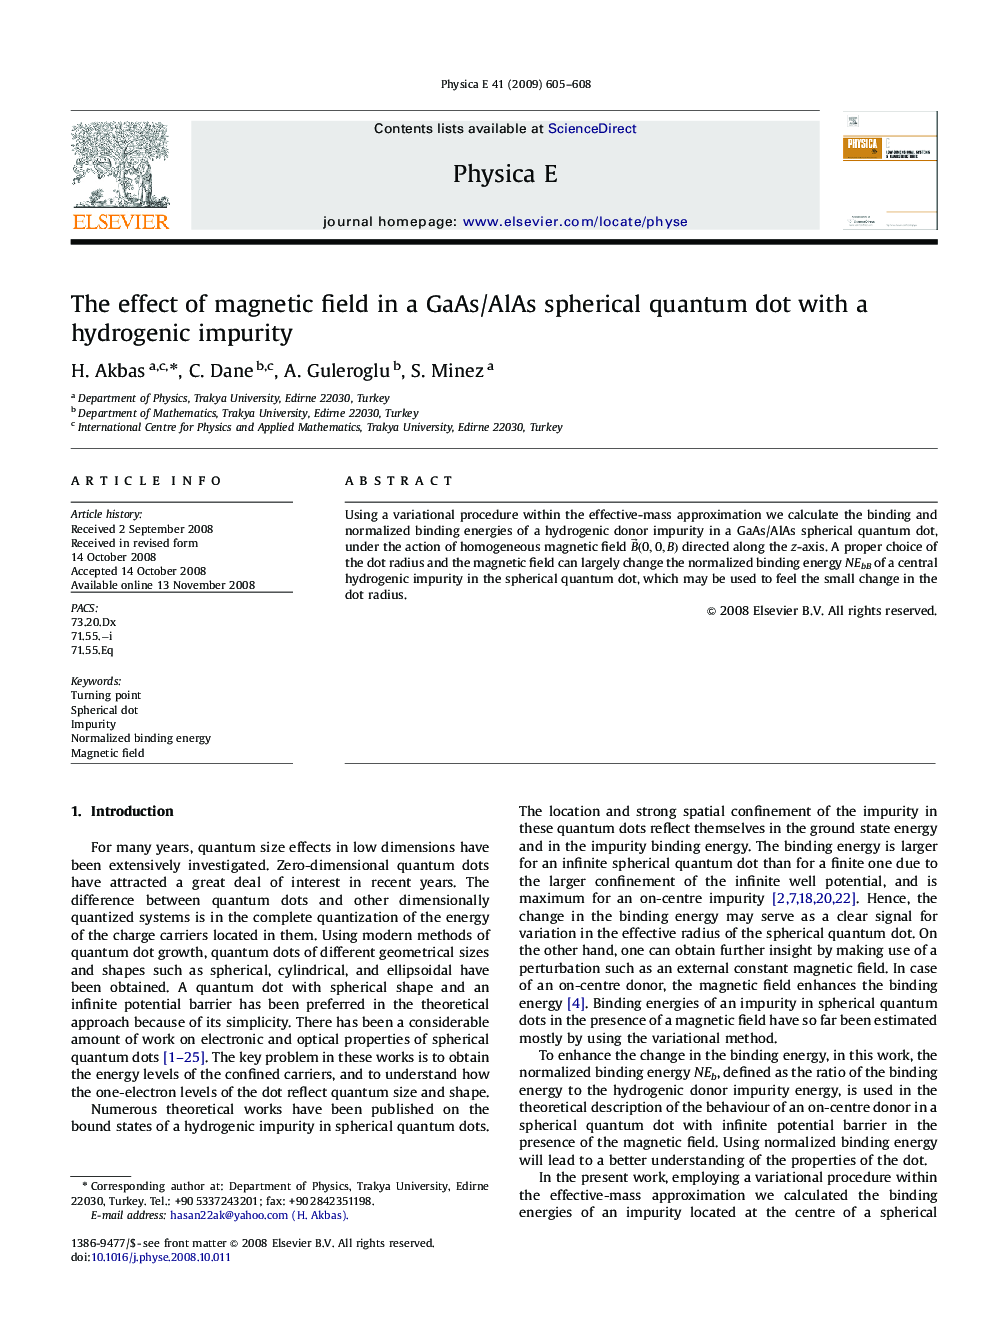 The effect of magnetic field in a GaAs/AlAs spherical quantum dot with a hydrogenic impurity